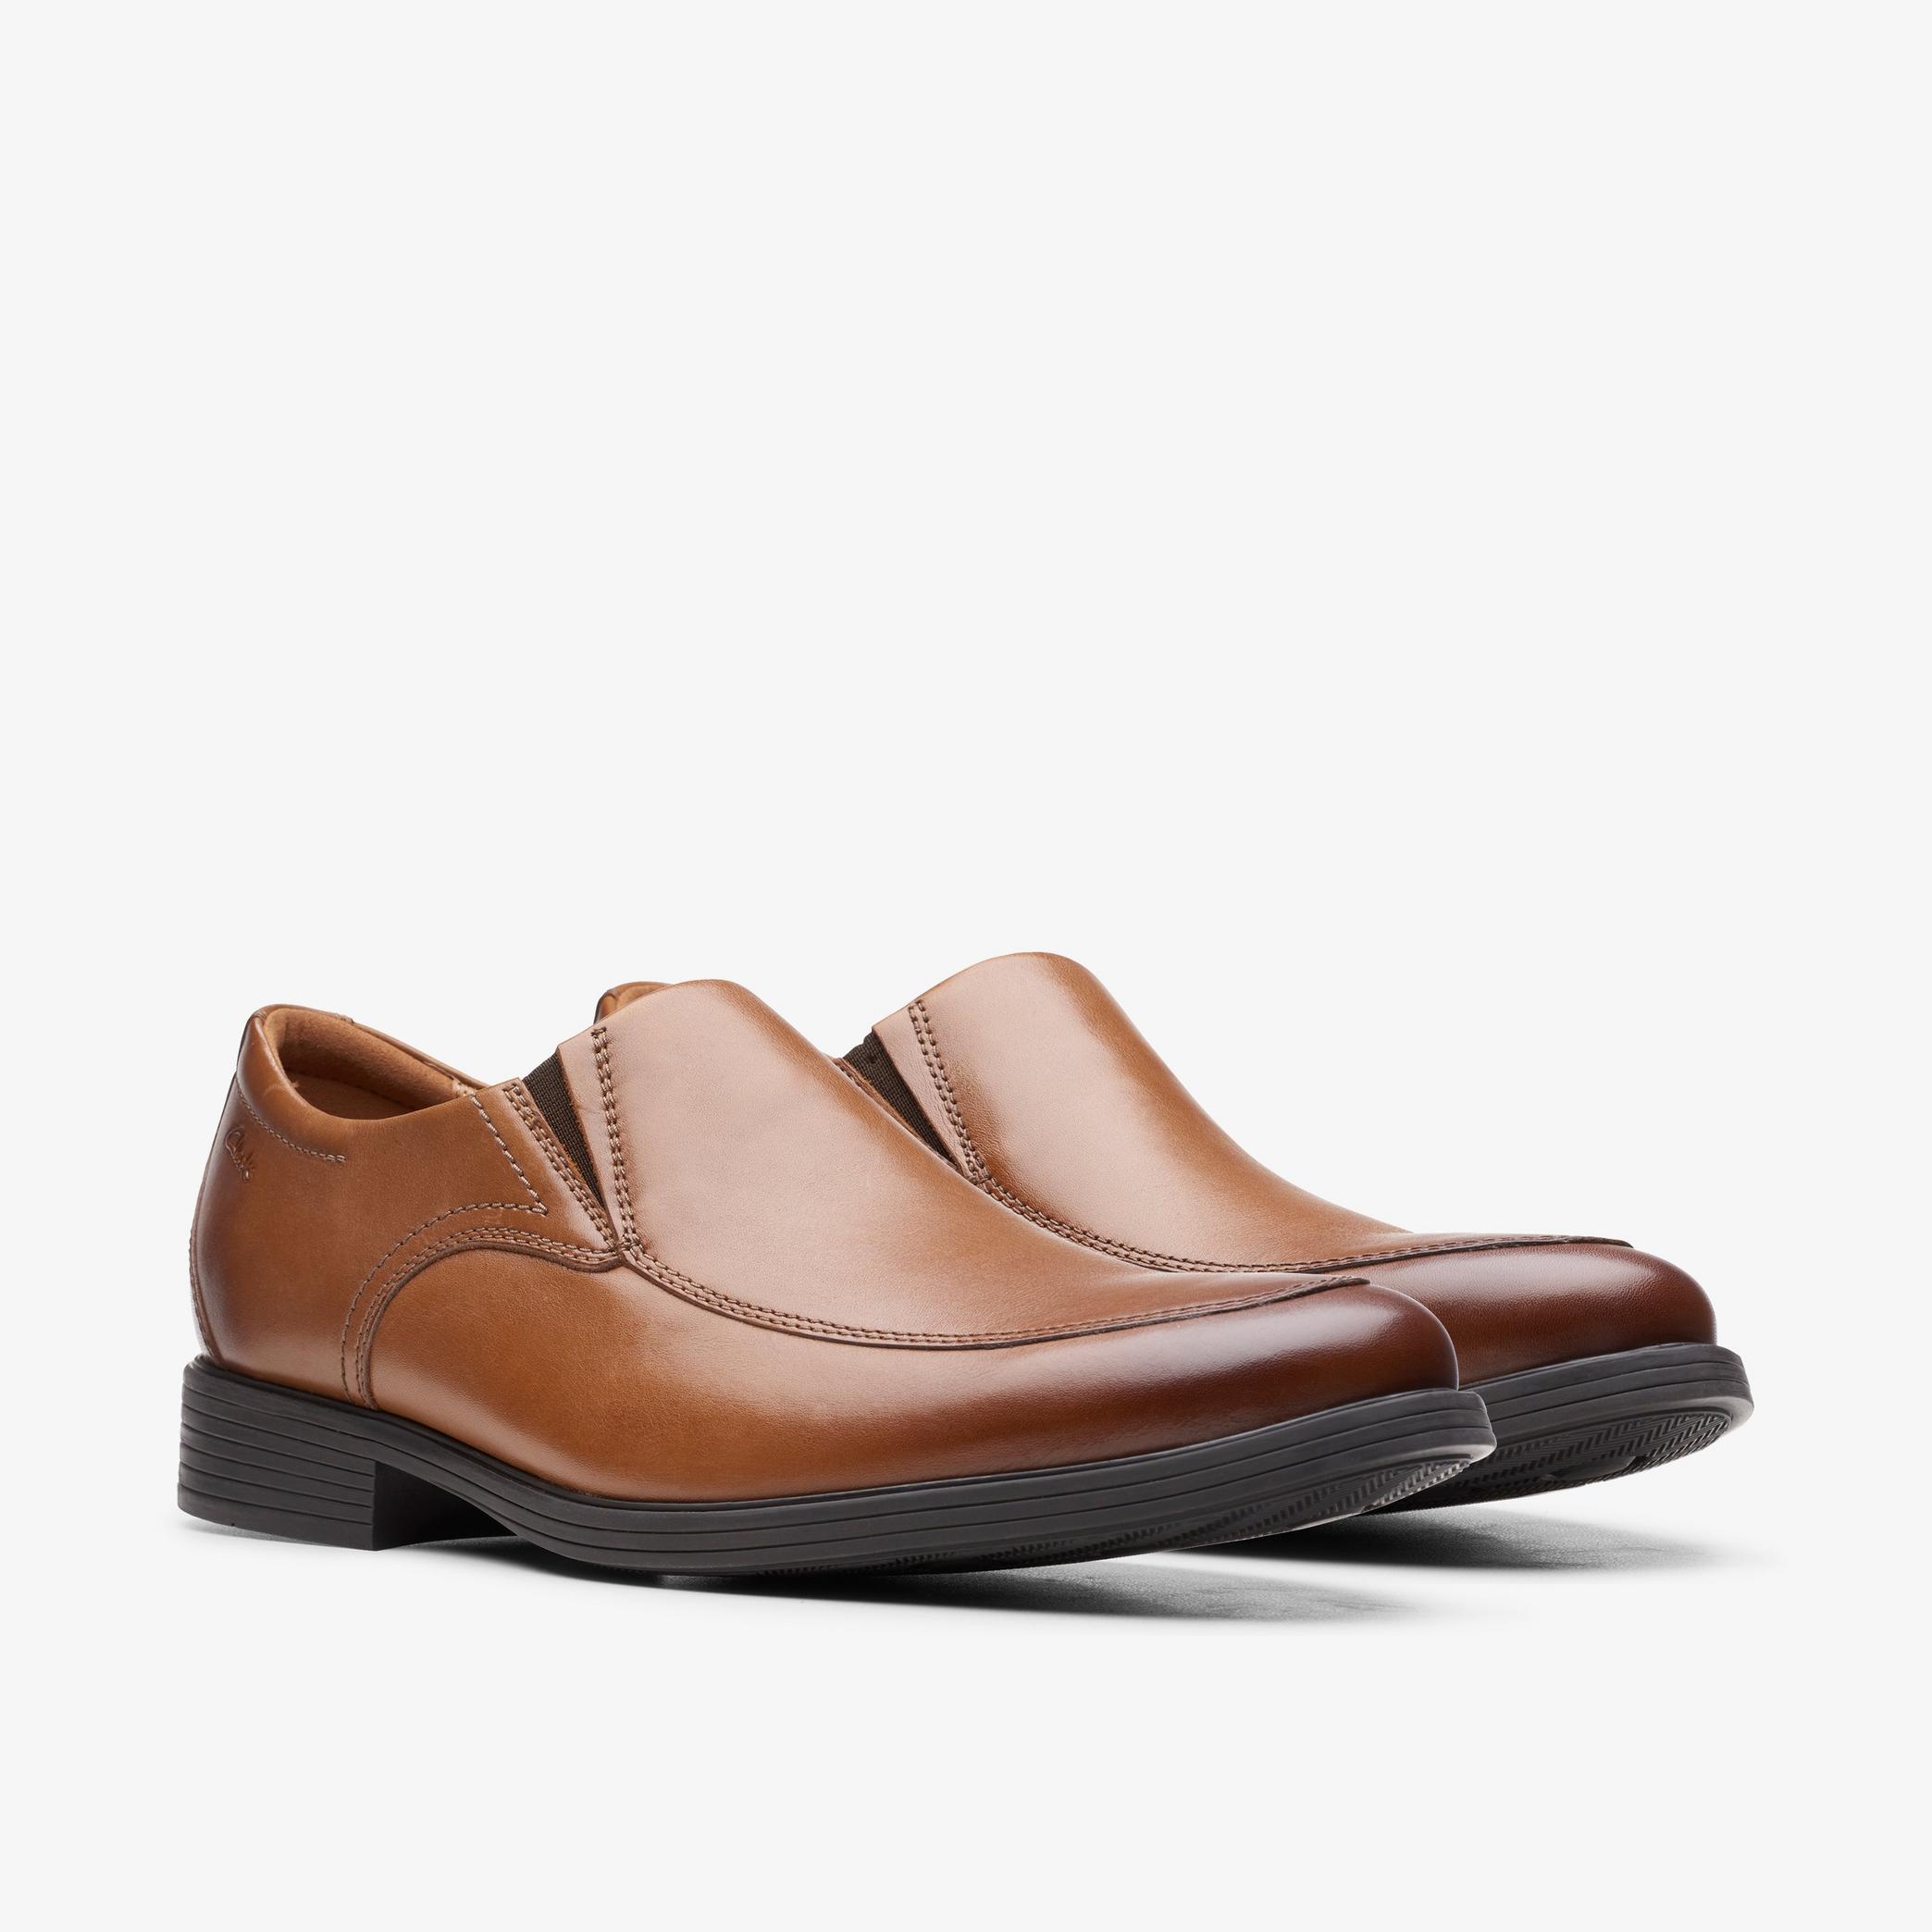 Whiddon Step Dark Tan Leather Loafers, view 4 of 6